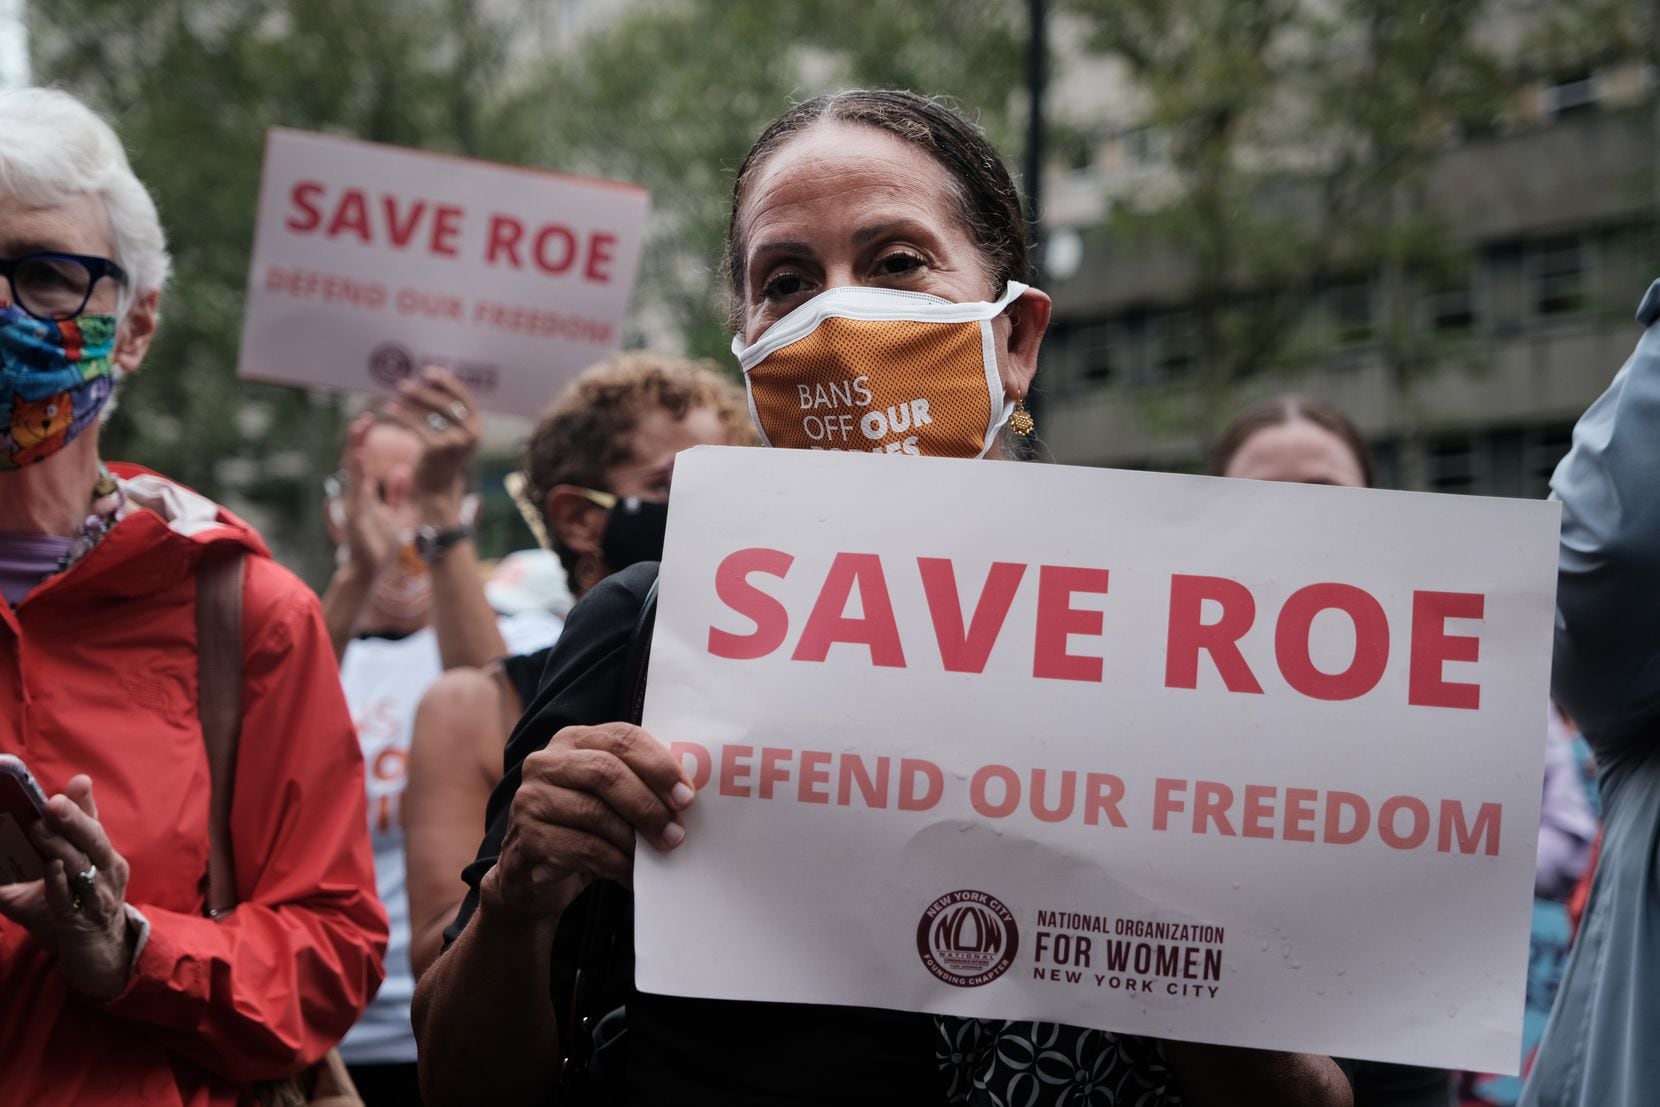 Supporters of abortion rights participate in a rally to denounce Texas' new six-week abortion ban on Sept. 9, 2021, in New York, the same day the Biden Justice Department sued the state, calling the new law unconstitutional.